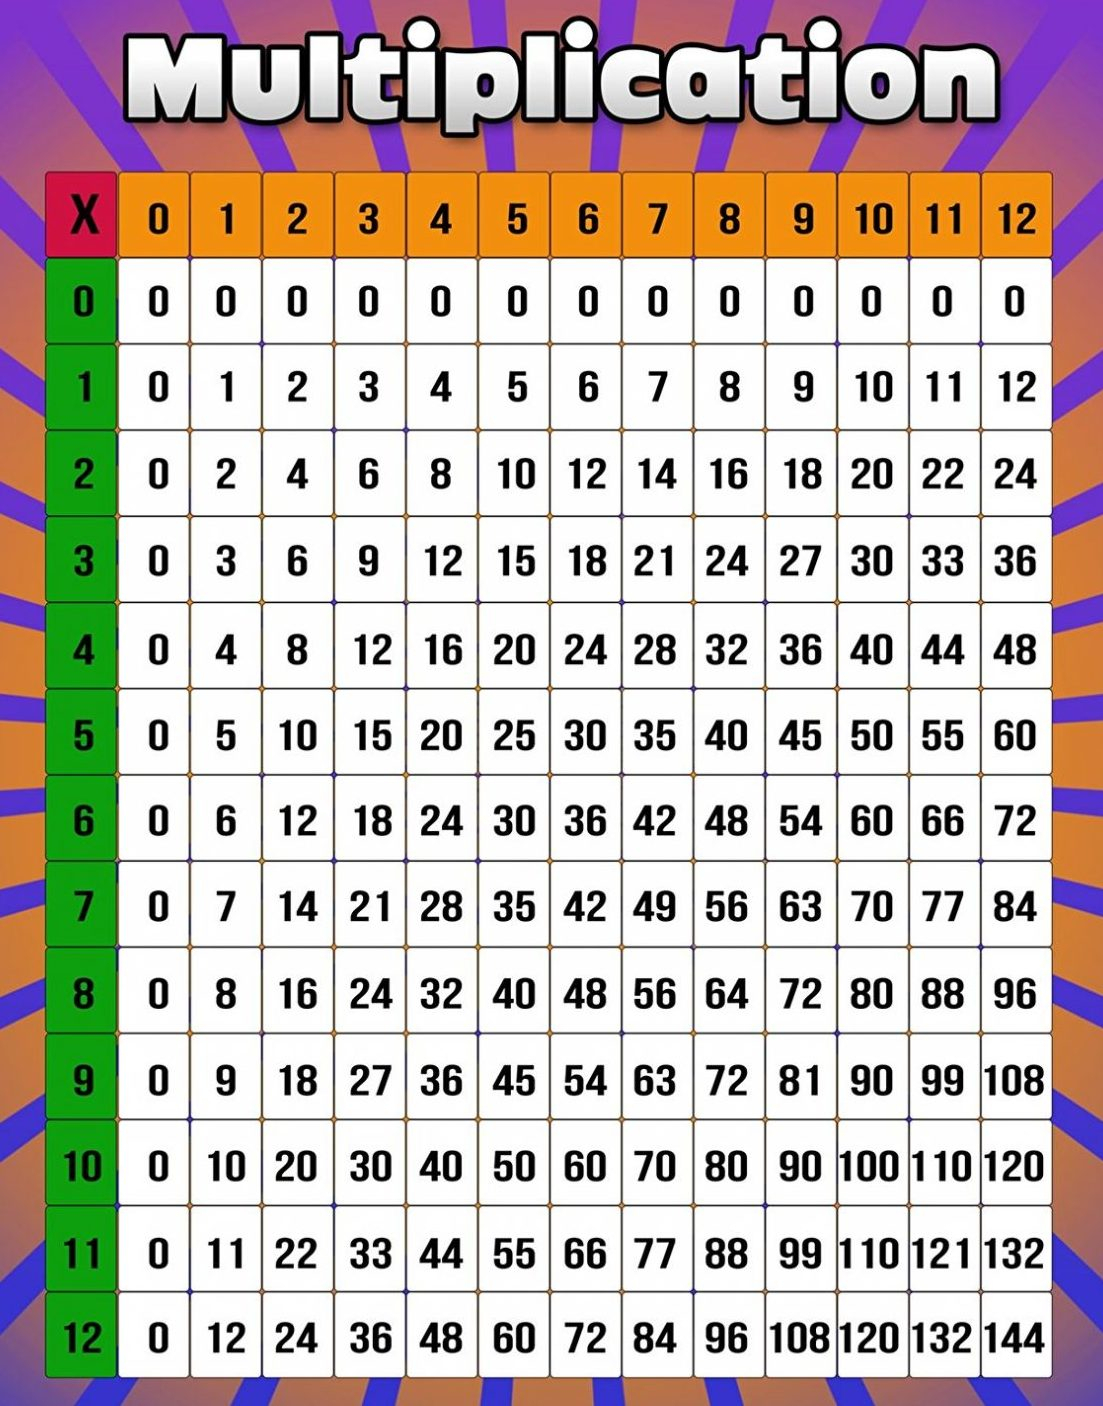 12 by 12 multiplication chart